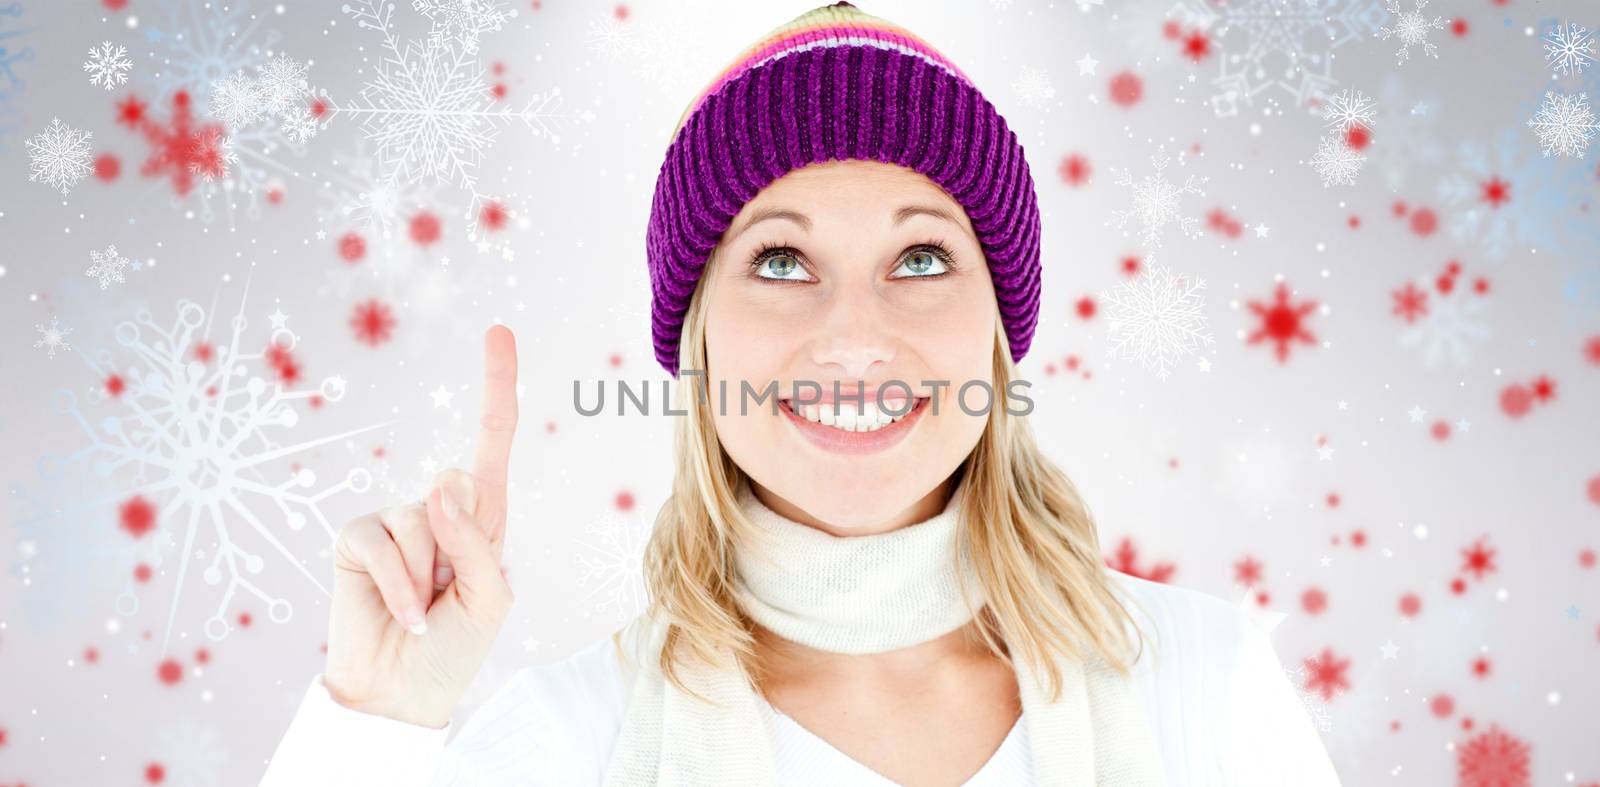 Bright woman with a colorful hat pointing upwards against snowflake pattern